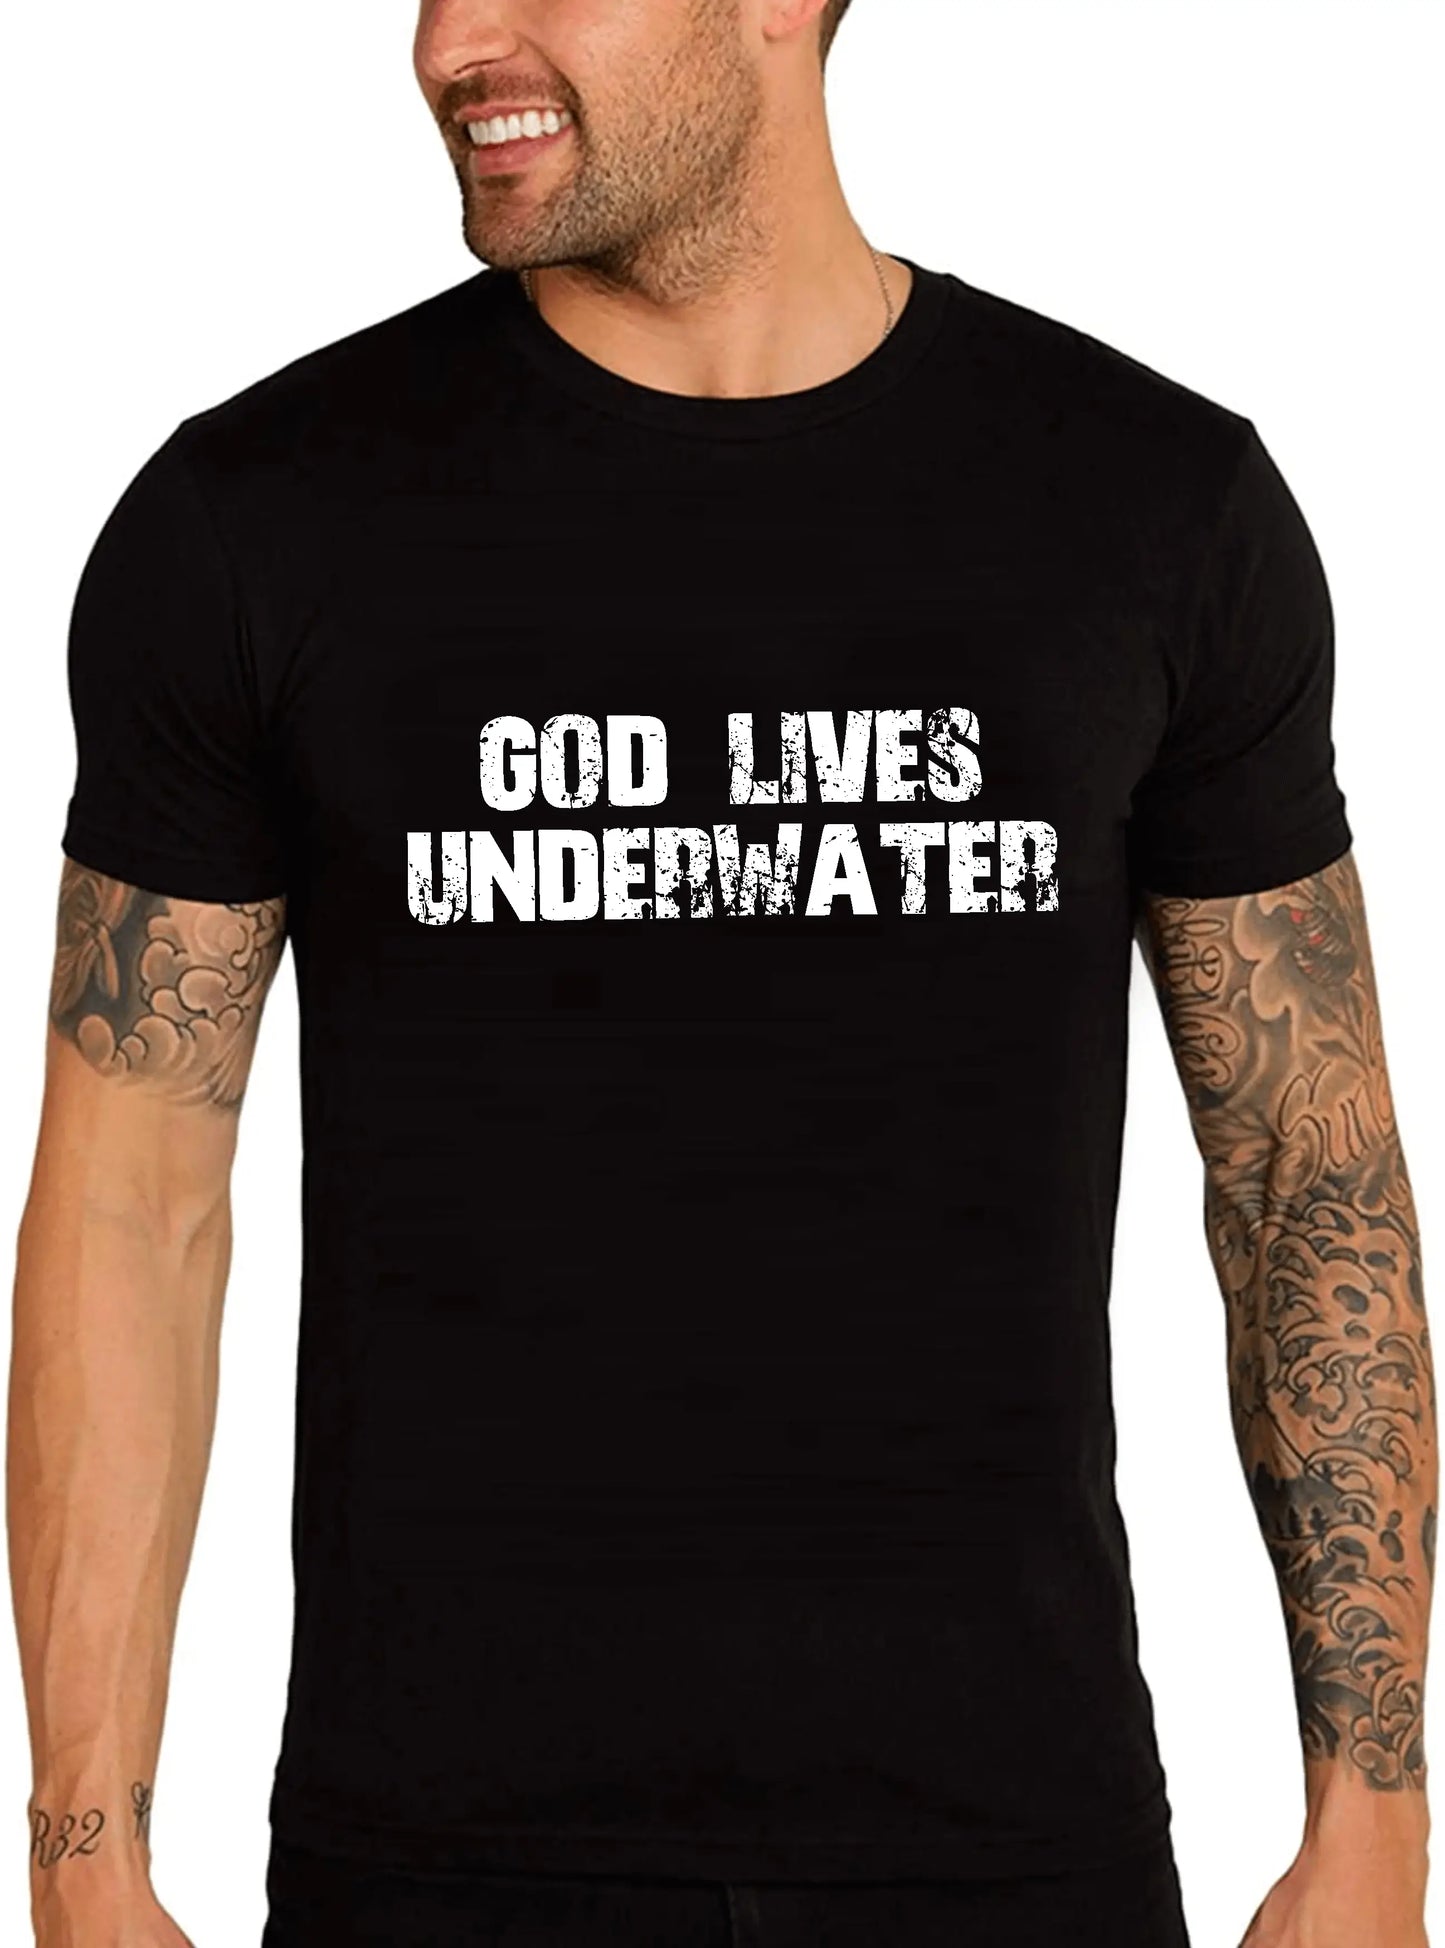 Men's Graphic T-Shirt God Lives Underwater Eco-Friendly Limited Edition Short Sleeve Tee-Shirt Vintage Birthday Gift Novelty